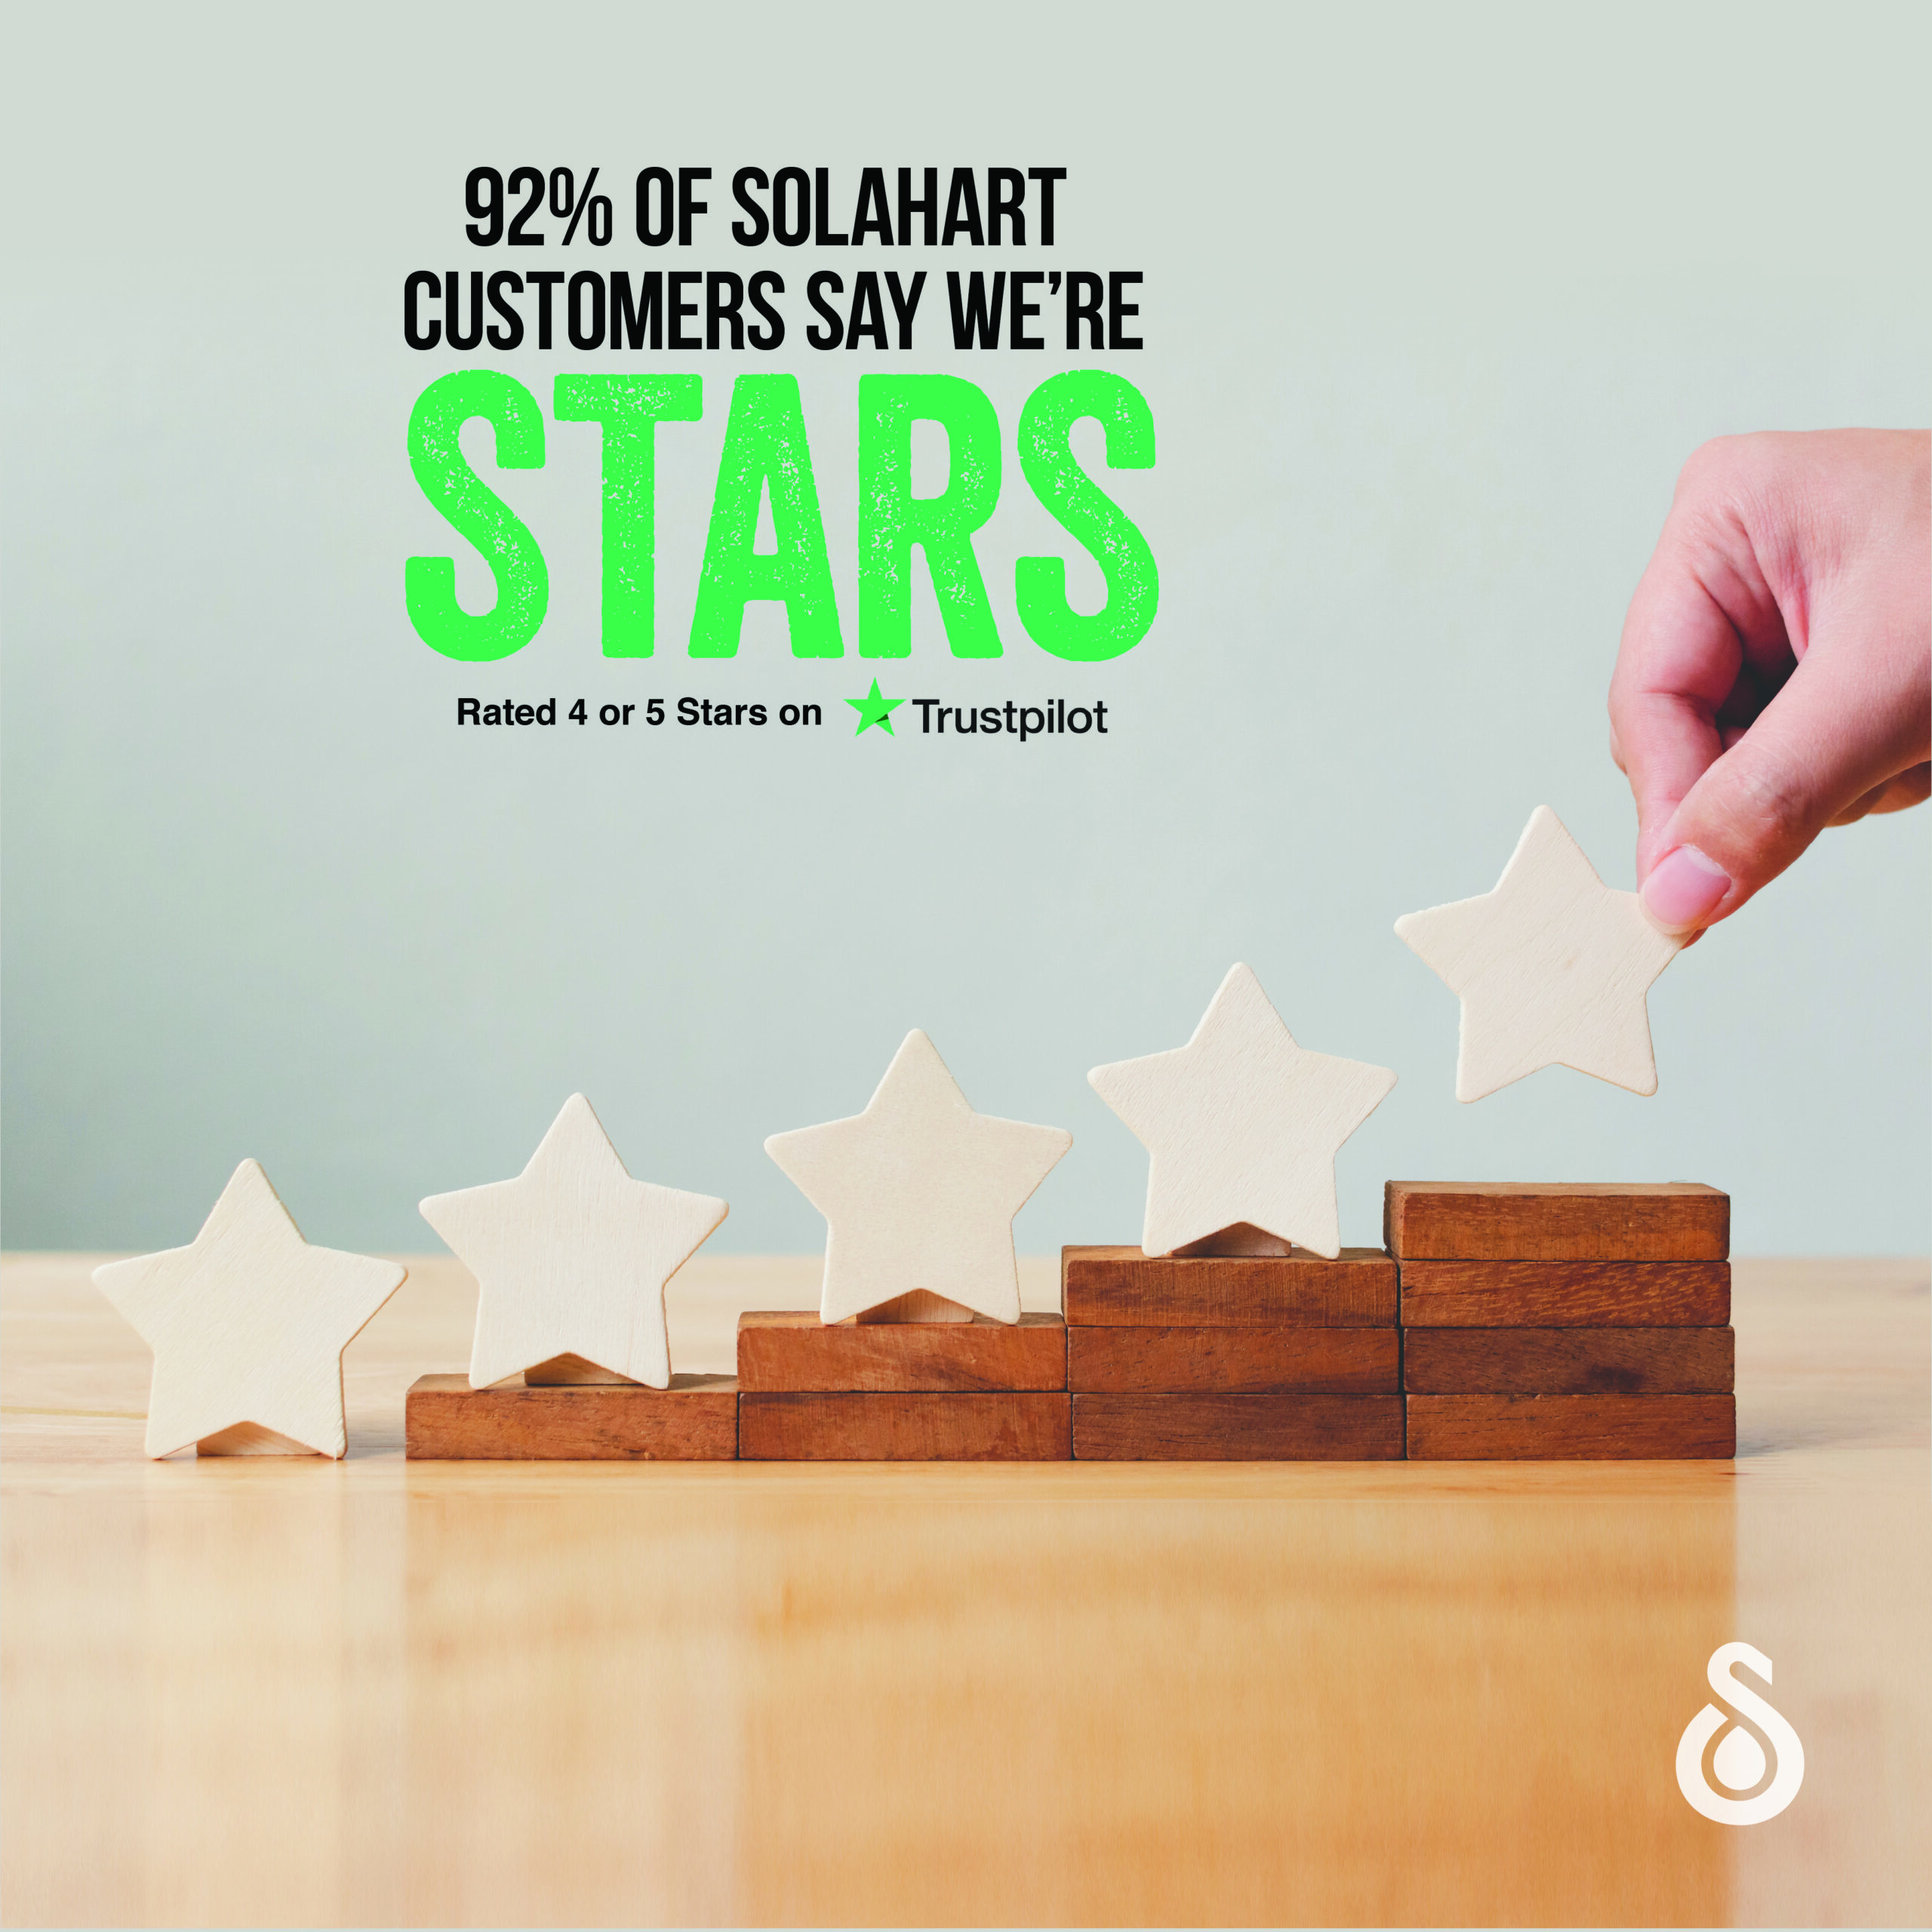 92% of customers say we're 5 stars